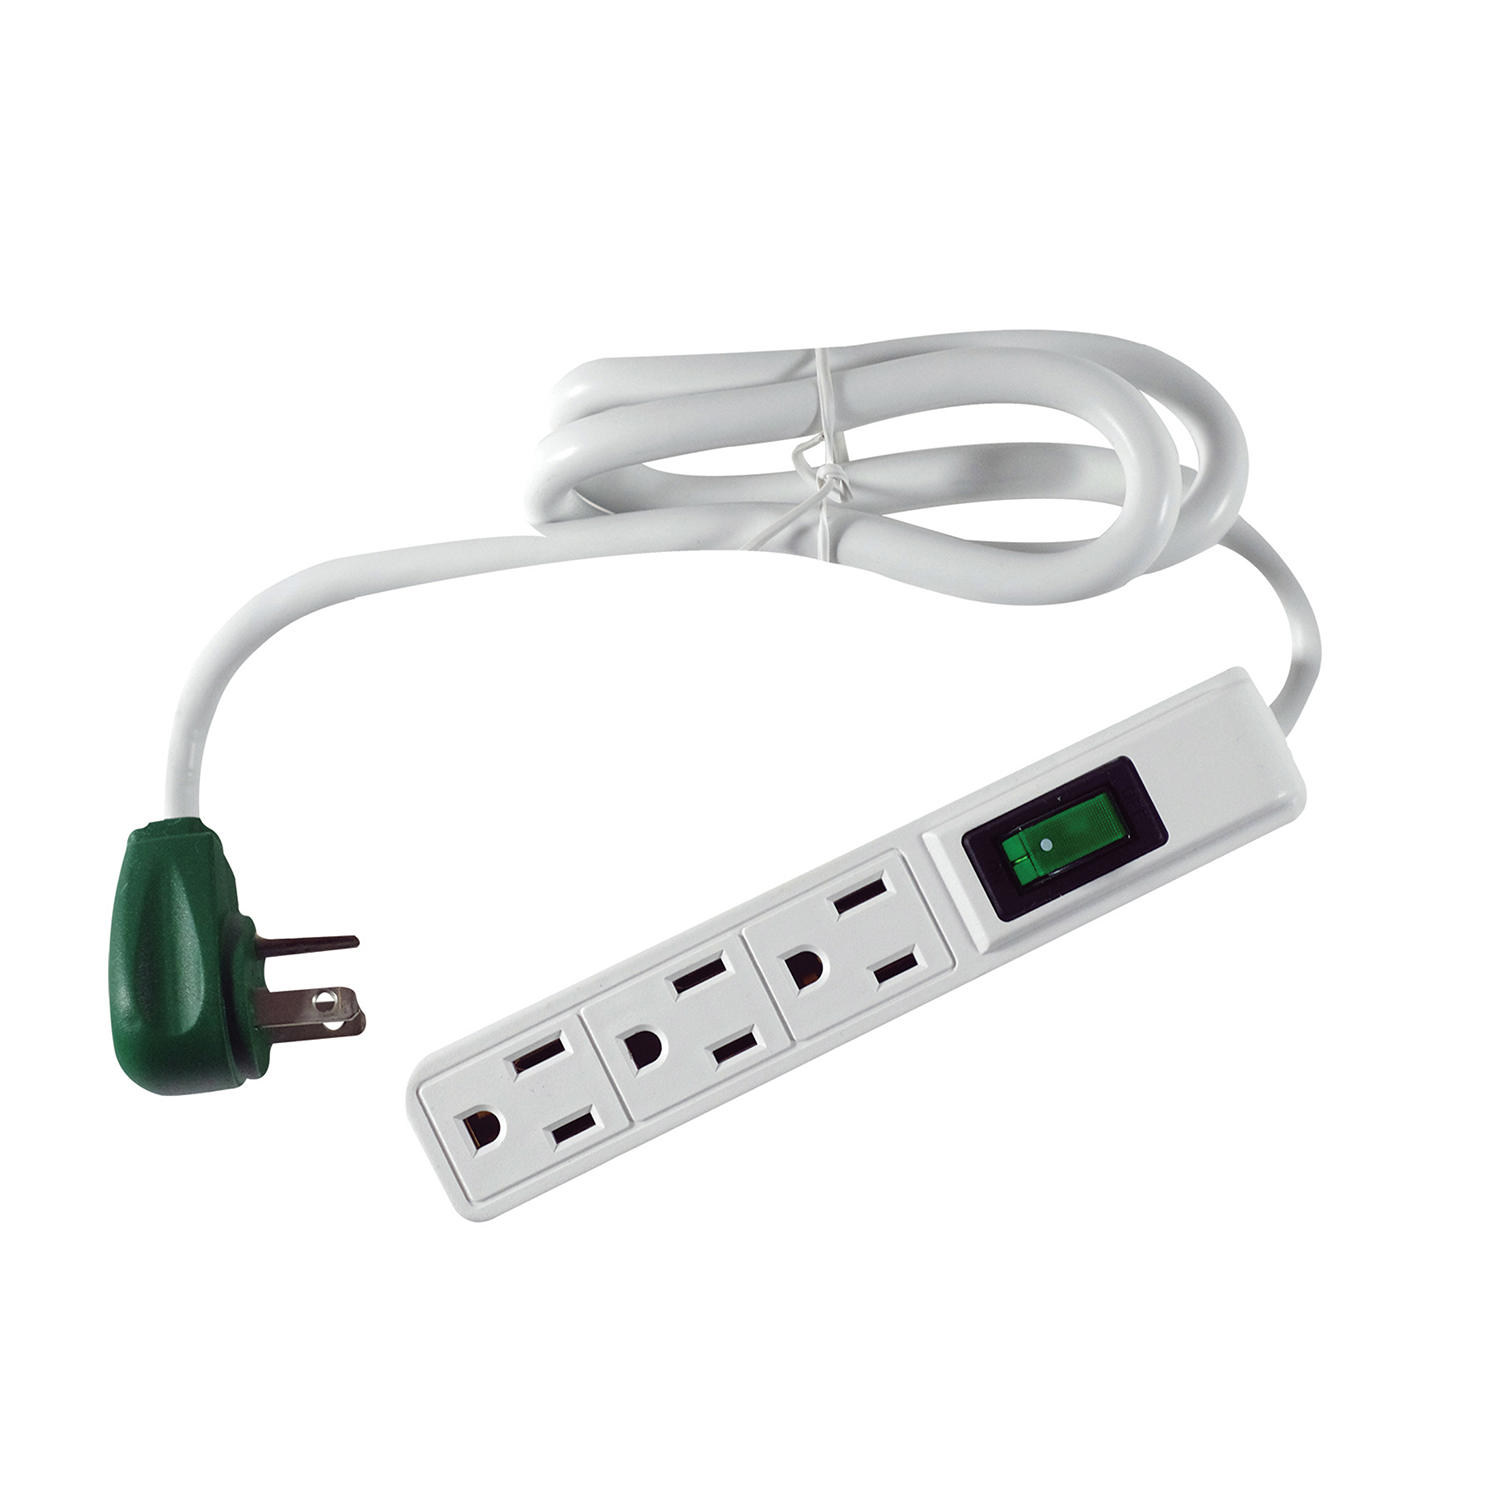 GoGreen Power (GG-13002MS) 3 Outlet Power Strip, White, 2.5 Ft Cord - image 1 of 4